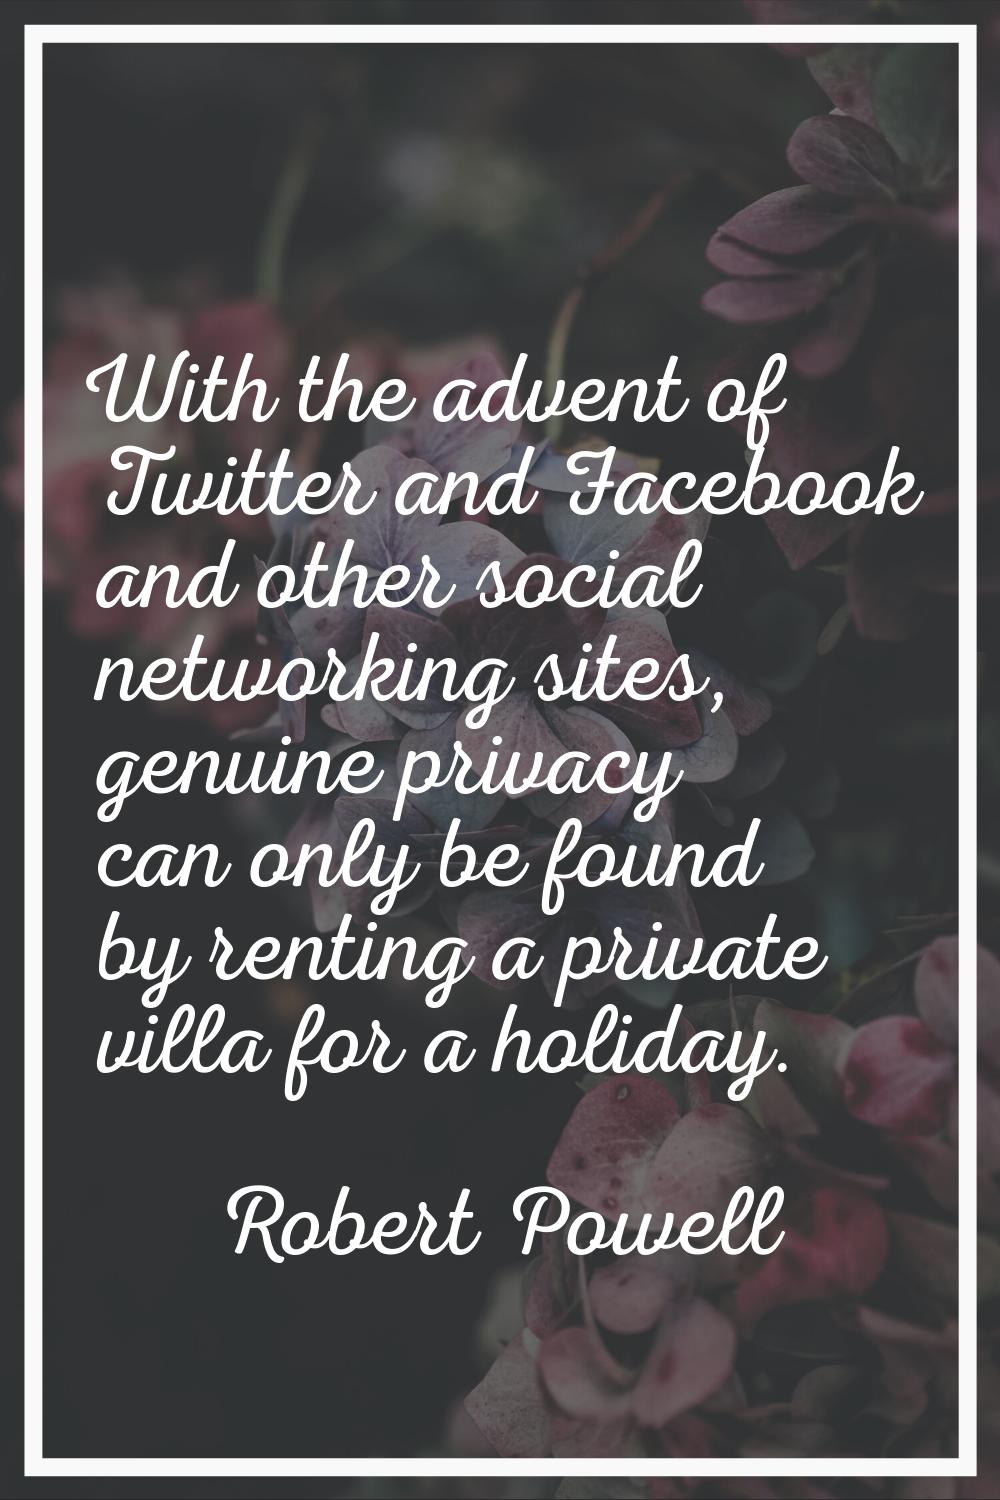 With the advent of Twitter and Facebook and other social networking sites, genuine privacy can only